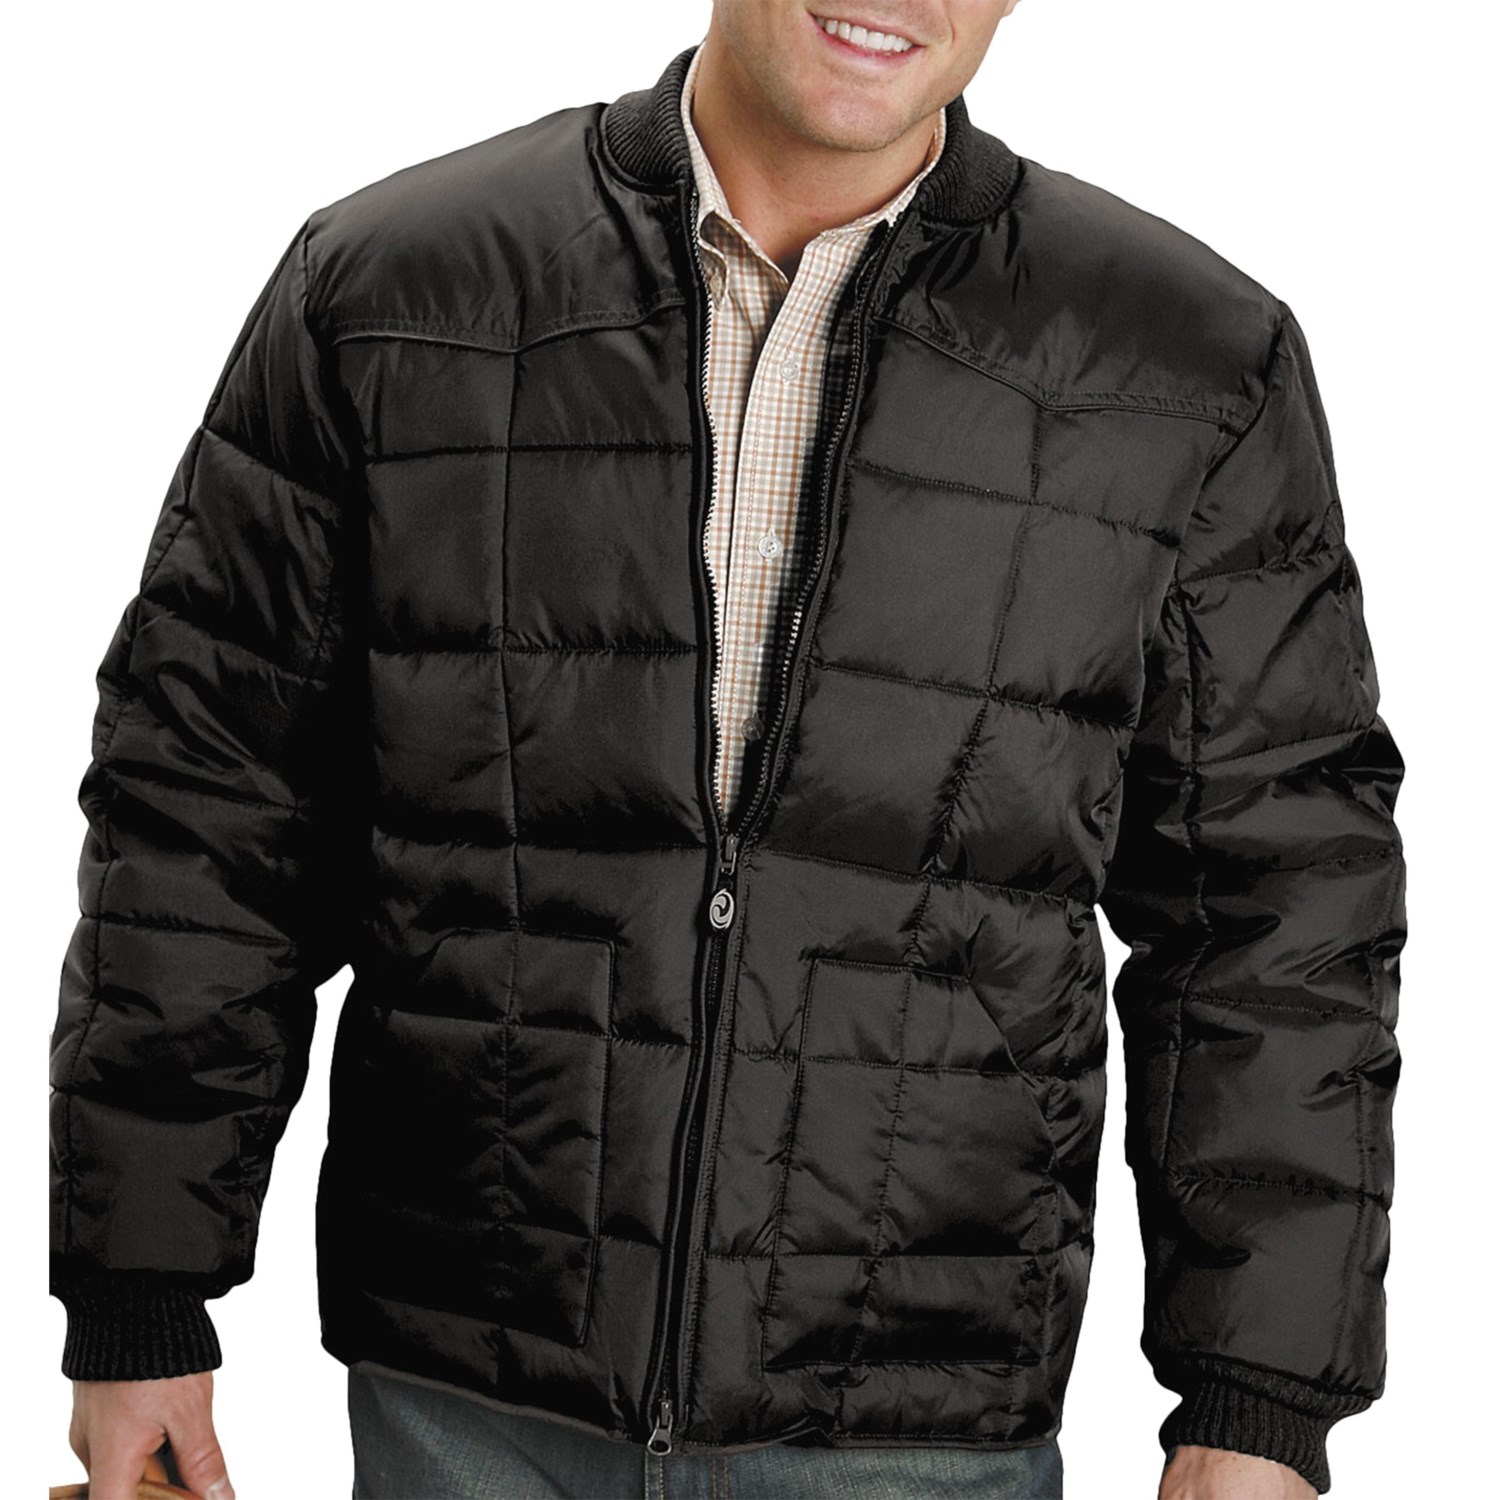 Roper Range Gear Jacket - Quilted Nylon, Insulated (For Men) in Black